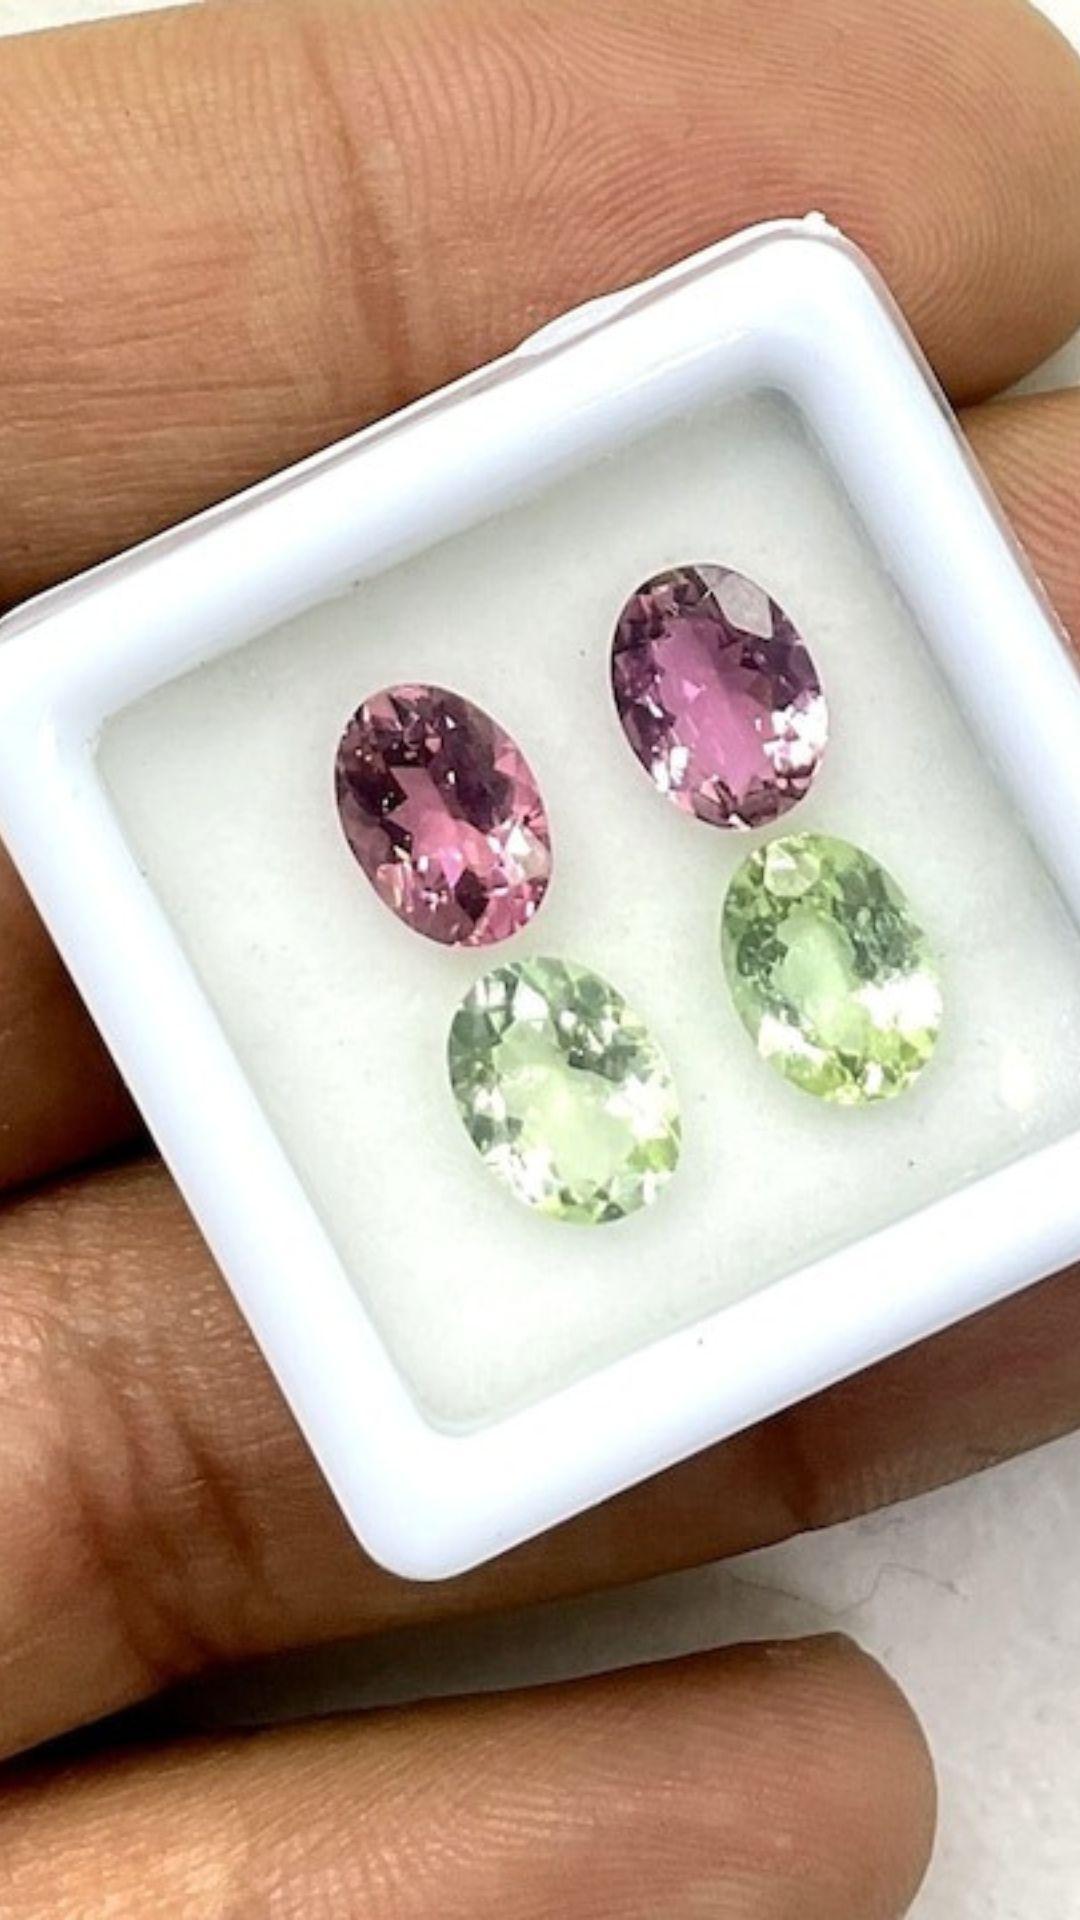 Gemstone - Tourmaline
Weight- 4.65 Carats
Shape - Oval
Size - 8x6 MM
Pieces - 4
Drill- Not Drilled